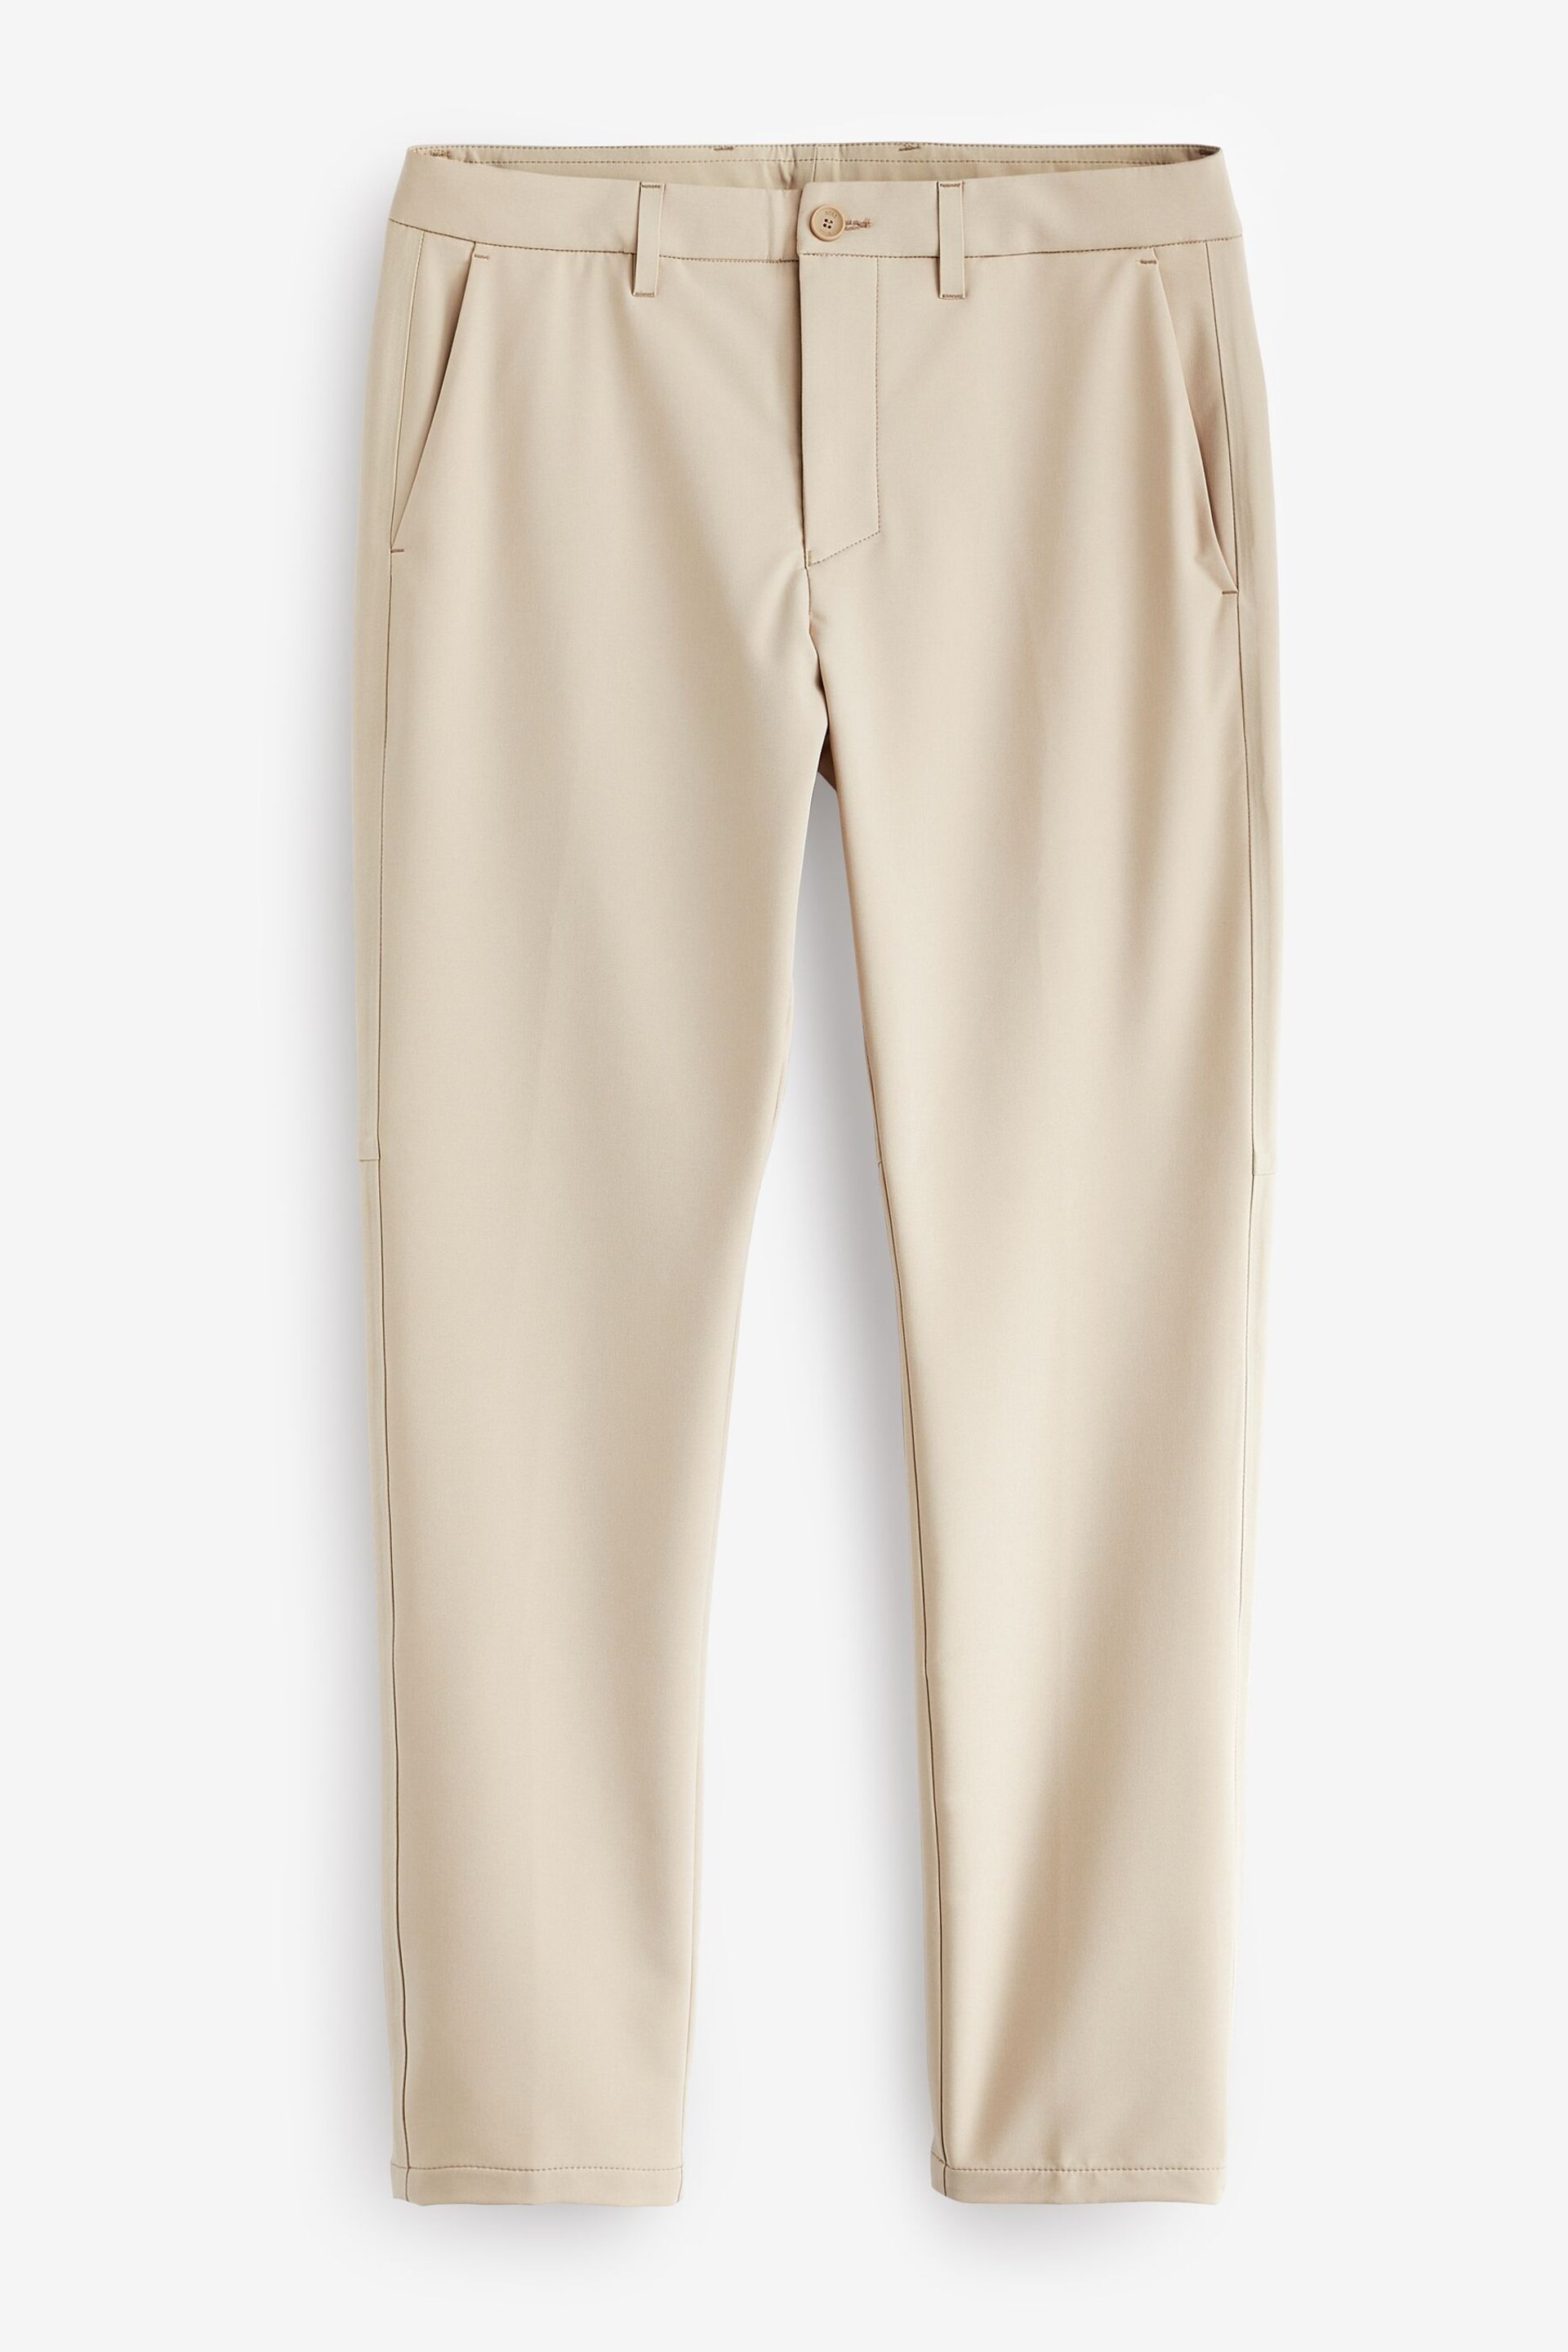 BOSS Cream Slim Fit Stretch Cotton Chino Trousers - Image 5 of 5